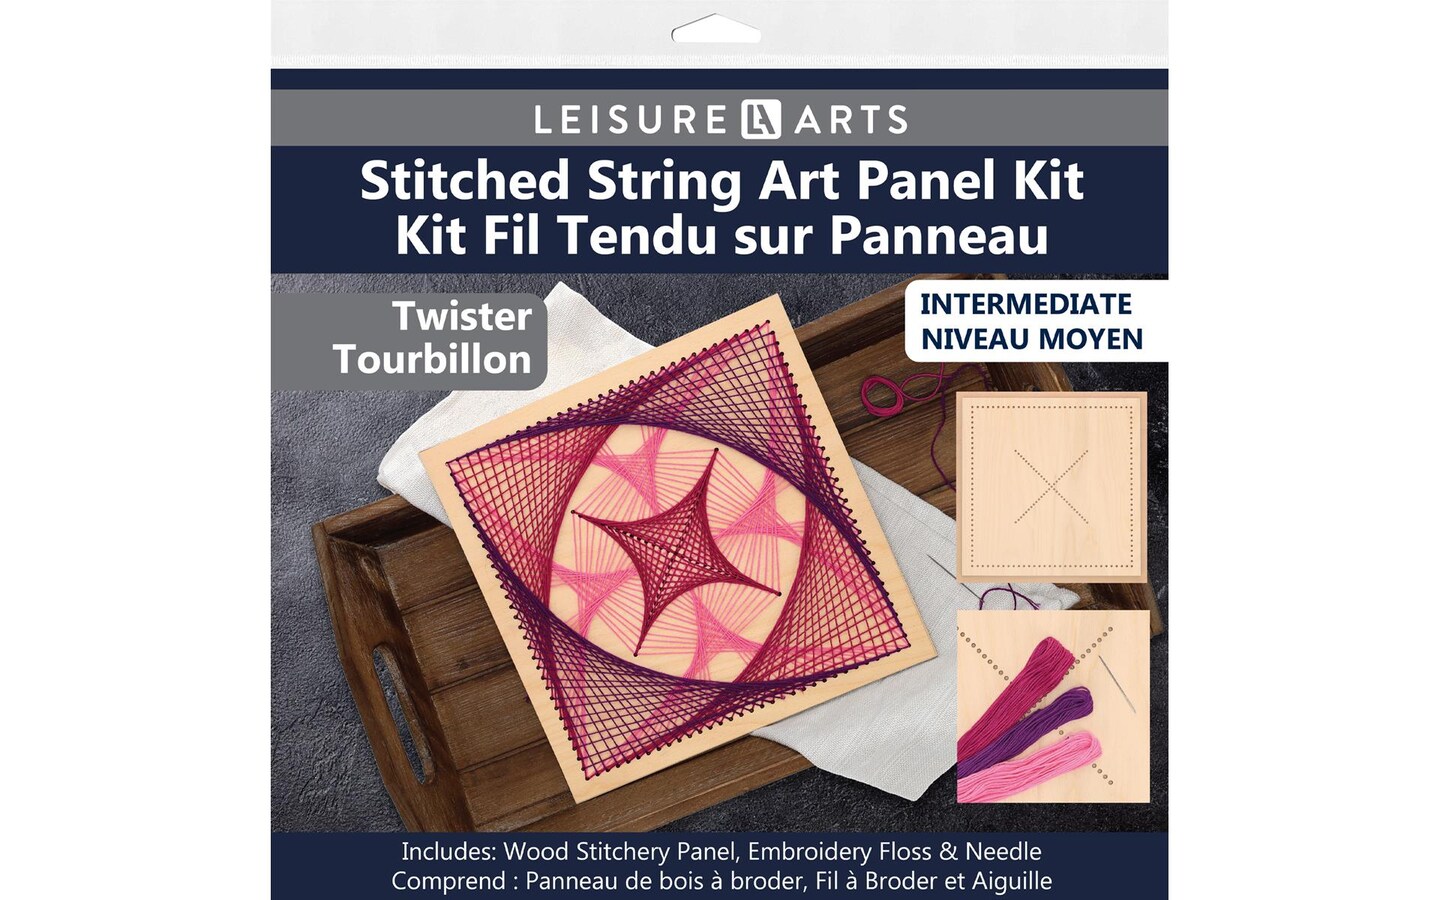 Wood Stitched String Art Kit with Shadow Box Cube - adult or kids